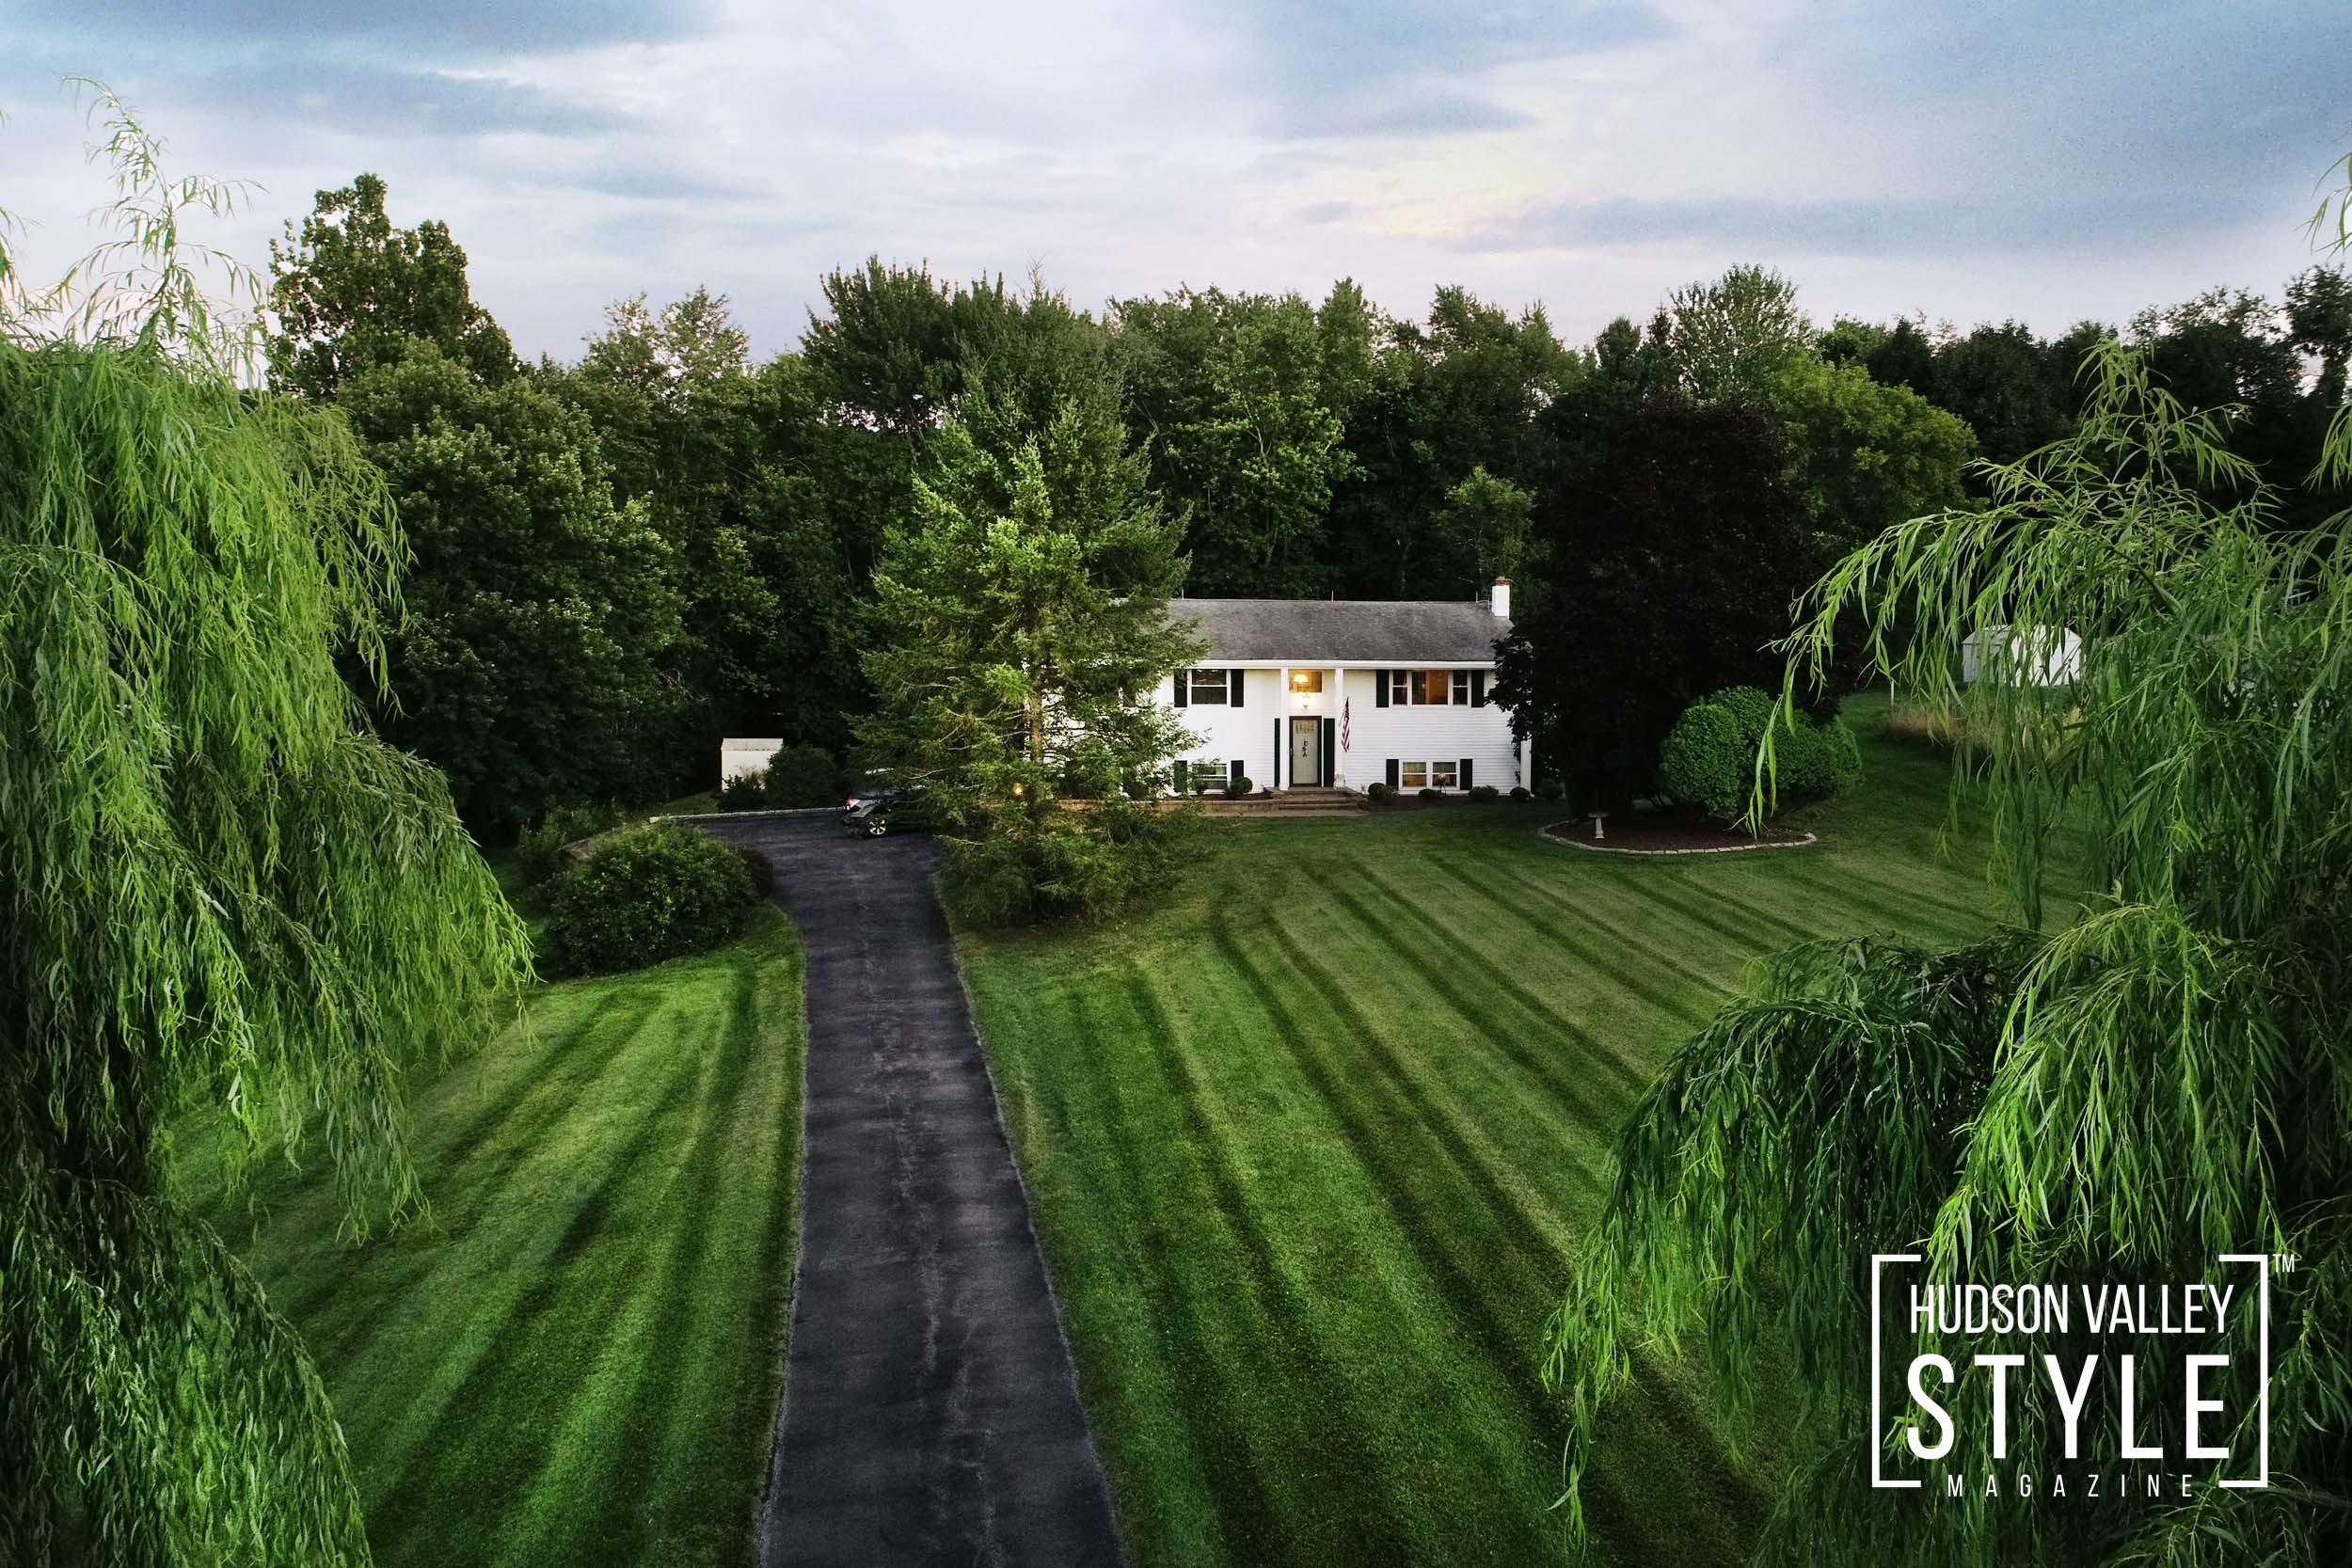 Hudson Valley Home for Sale - Alexander Maxwell Realty - Best Hudson Valley Real Estate